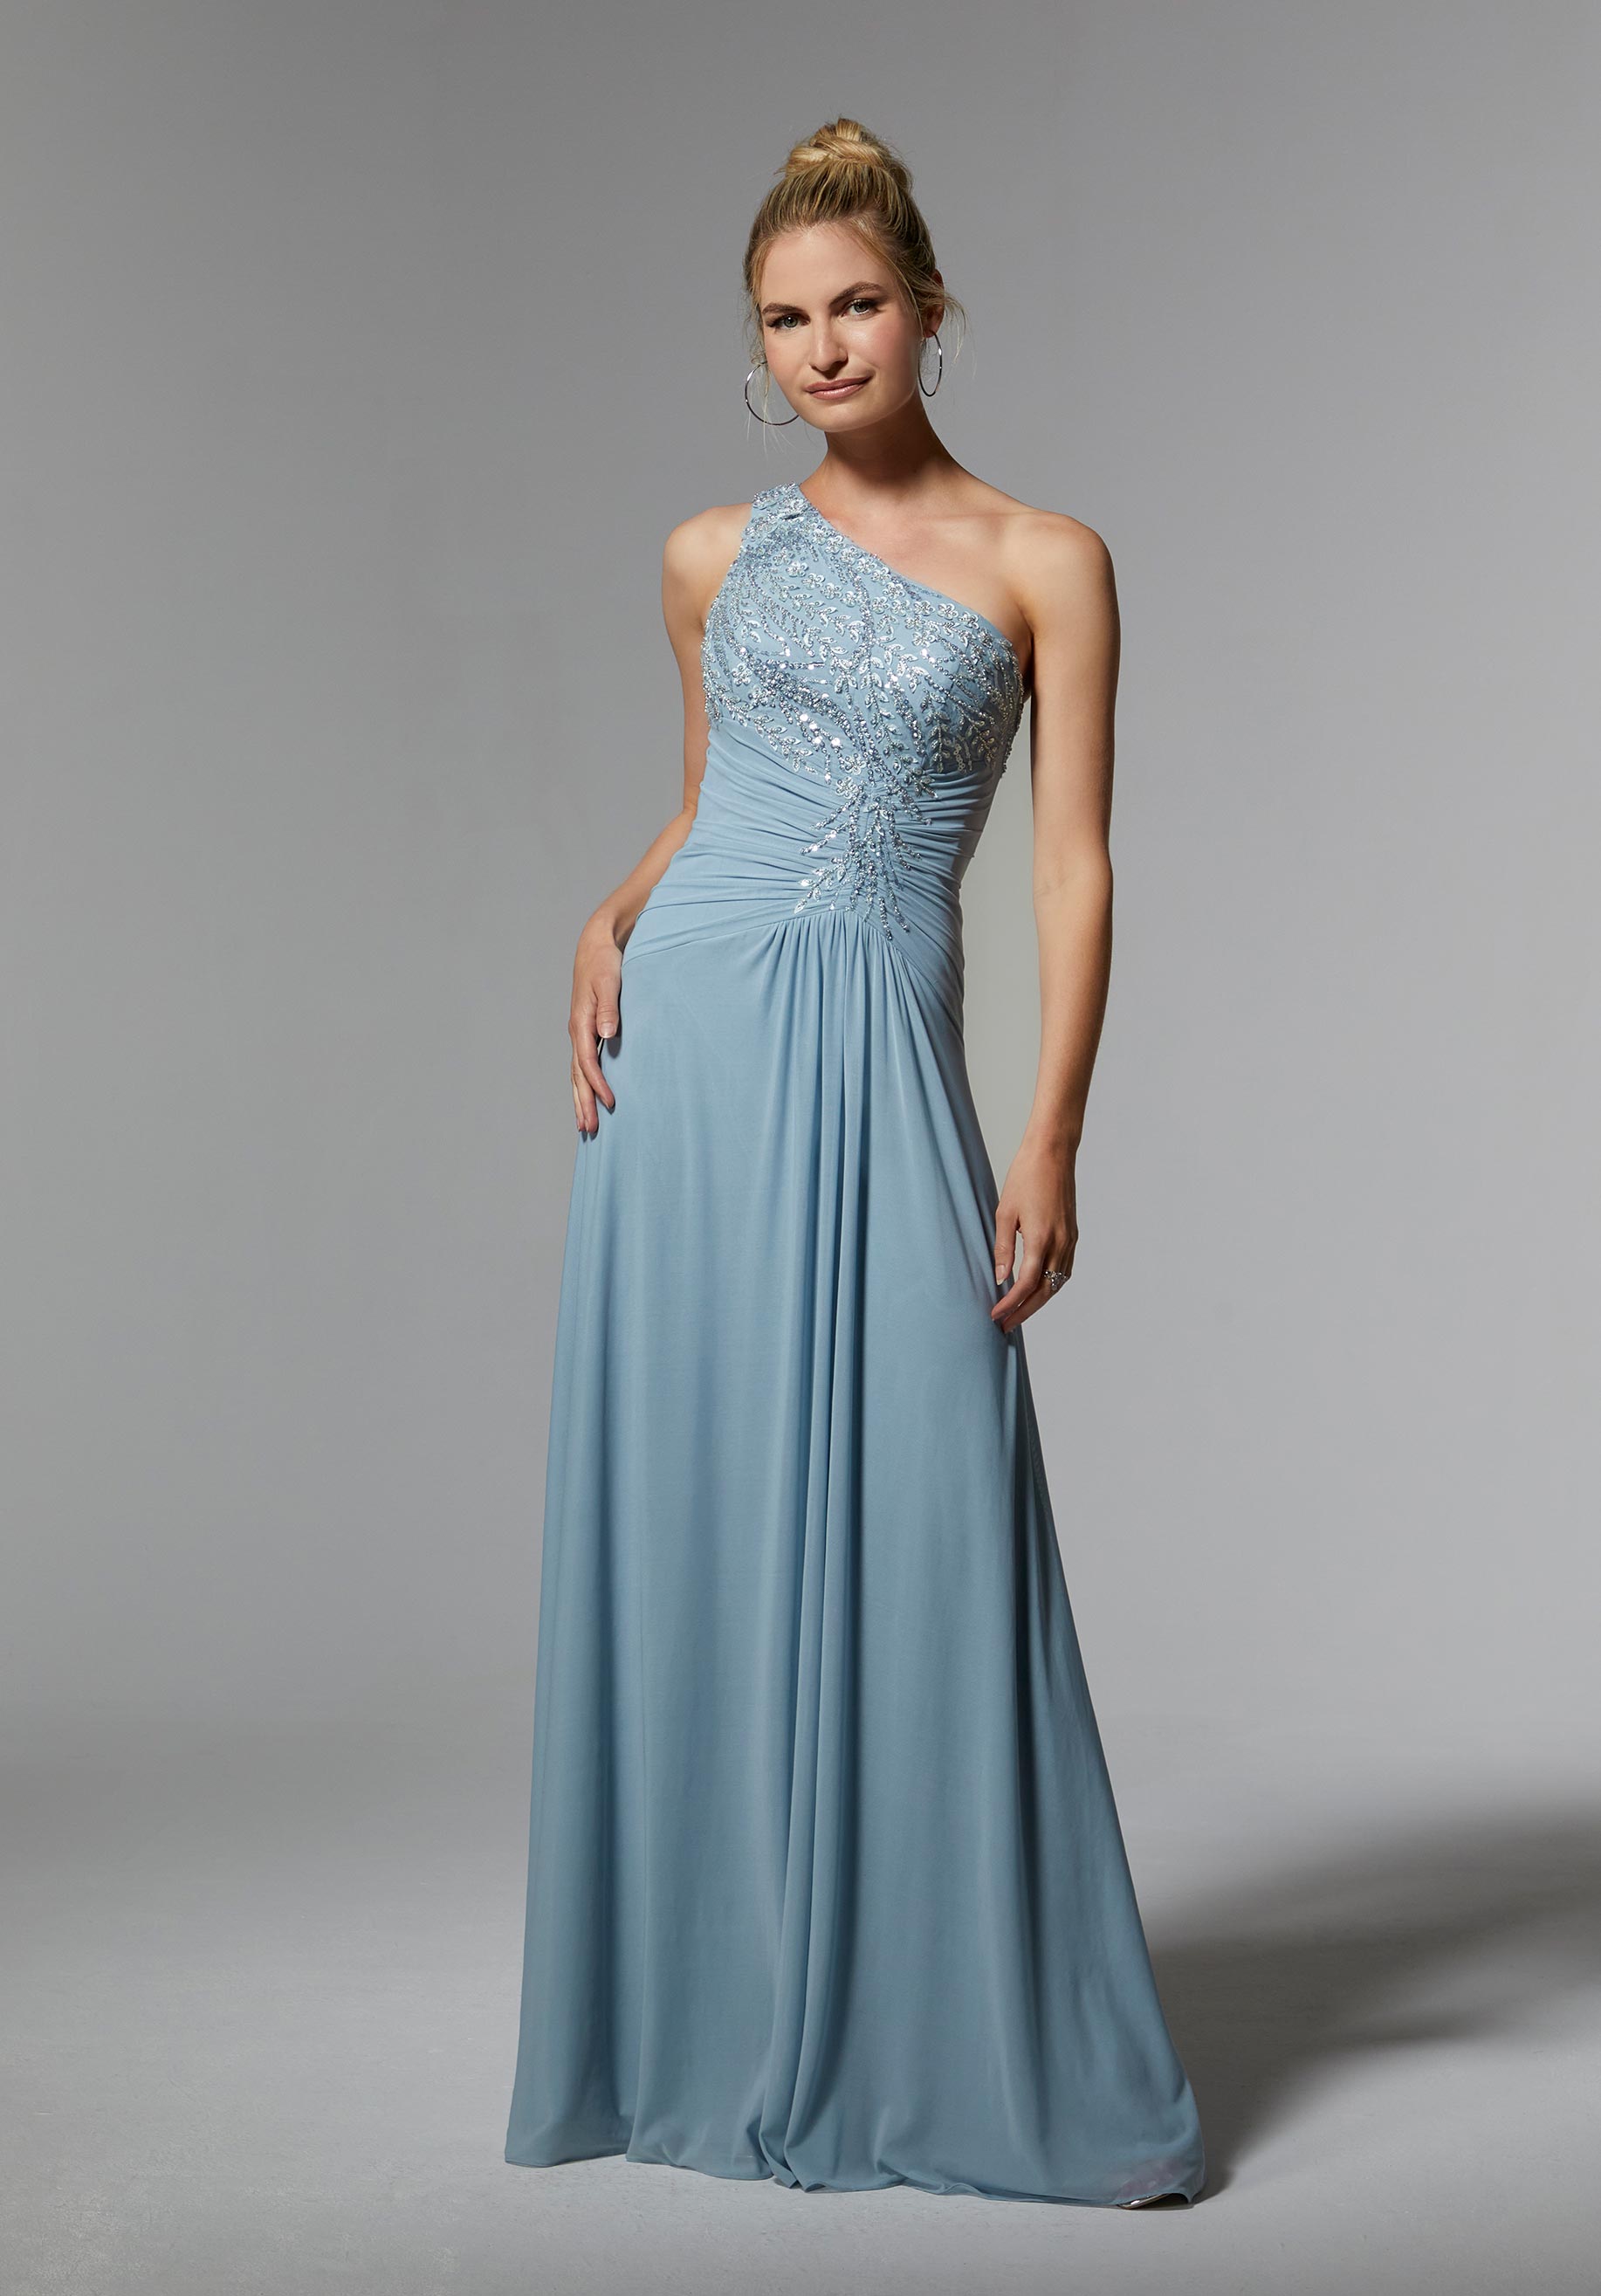 Spring Strapless Ruched Tiers Short Bridal Dress Gowns With